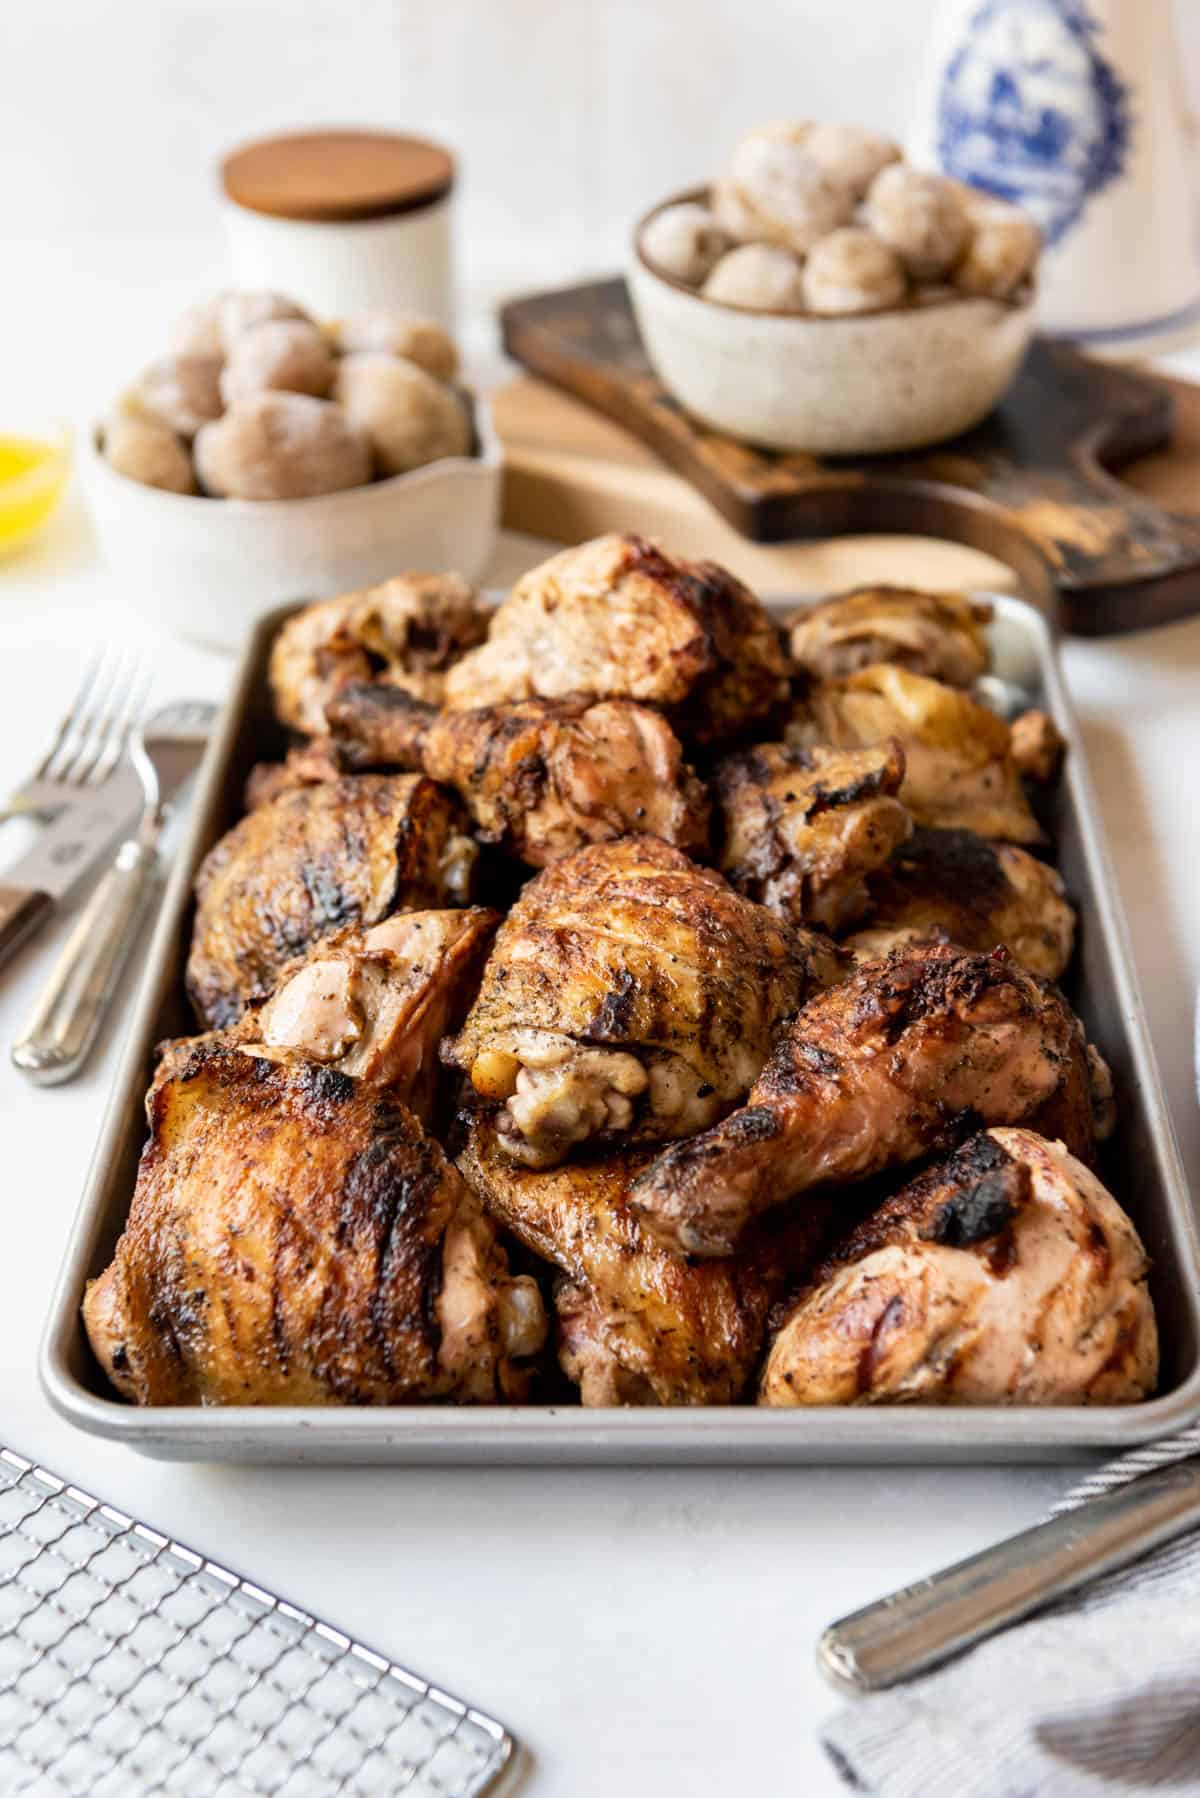 Grilled marinated Cornell chicken on a baking sheet in front of bowls of Syracuse salt potatoes.